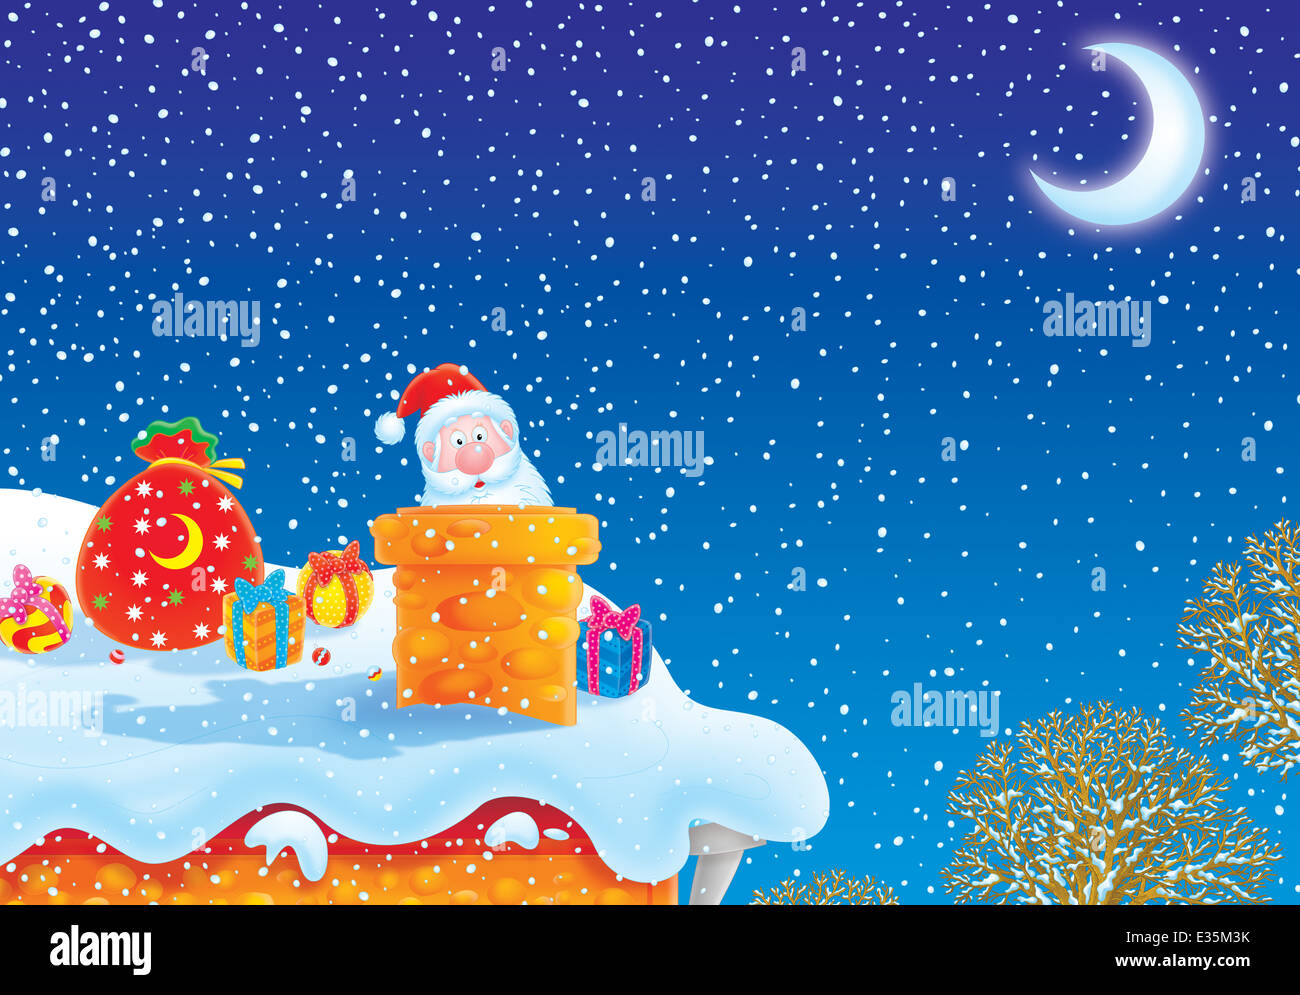 Santa Claus in a chimney pipe Stock Photo